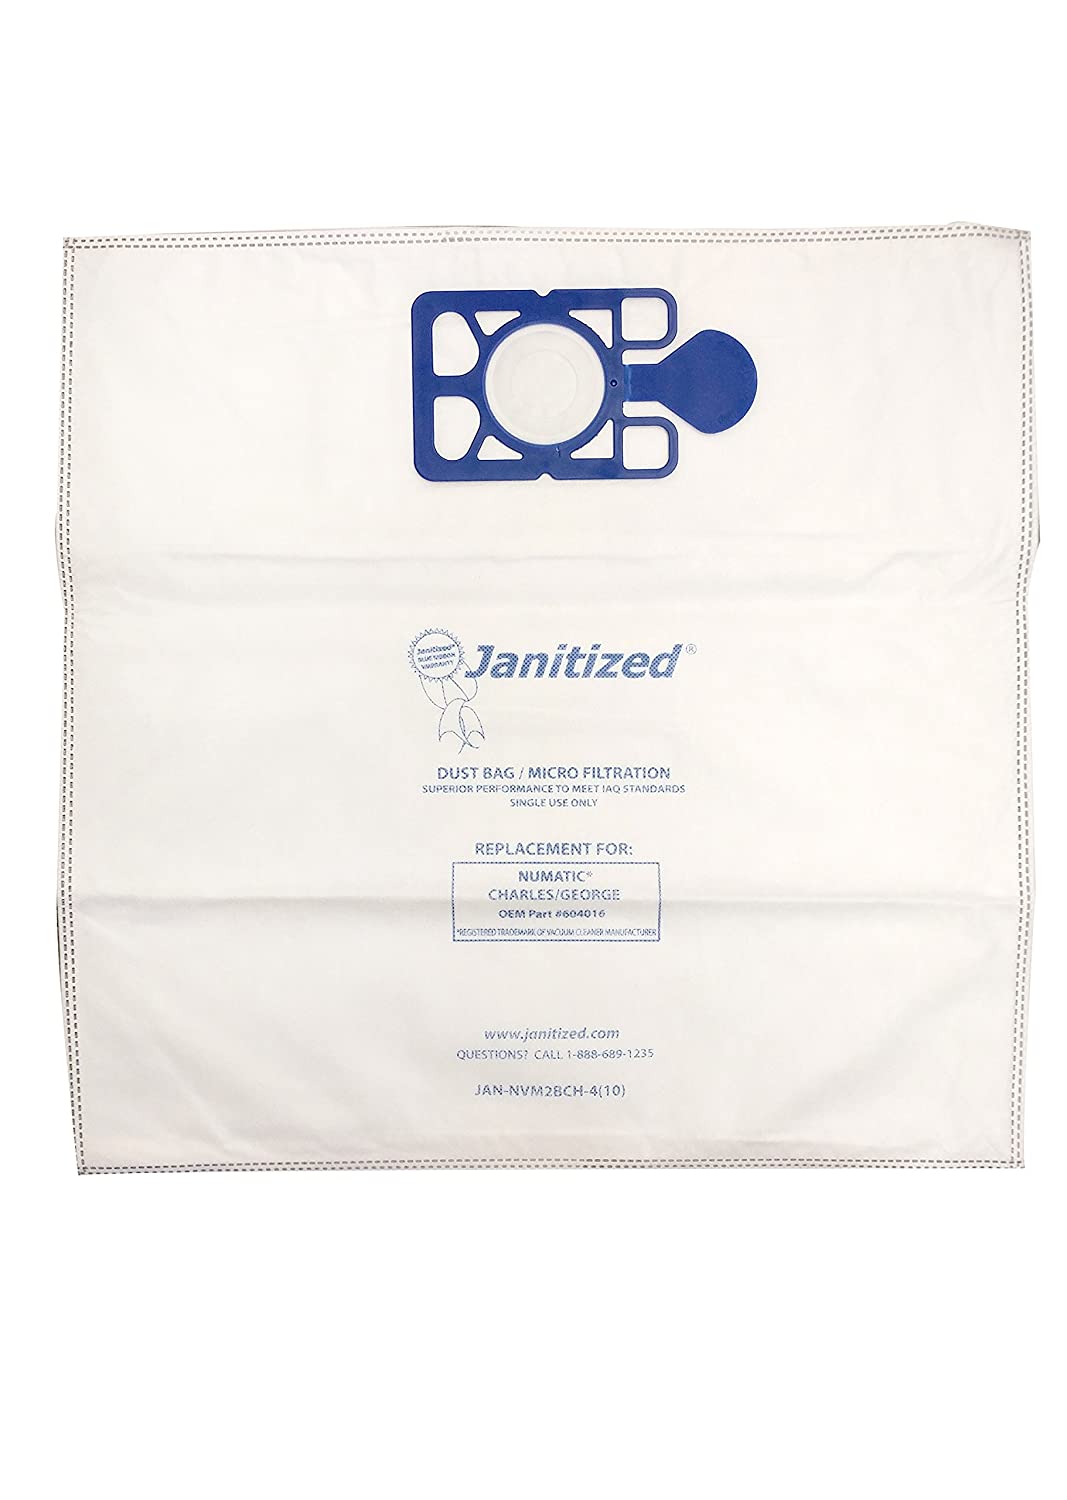 Janitized JAN-NVM2BCH-4(10) High Efficiency Premium Replacement Commercial Vacuum Bag for Nacecare and Numatic Charles/George, 300 Series Vacuum Cleaners, OEM#604016 (Case of 100)